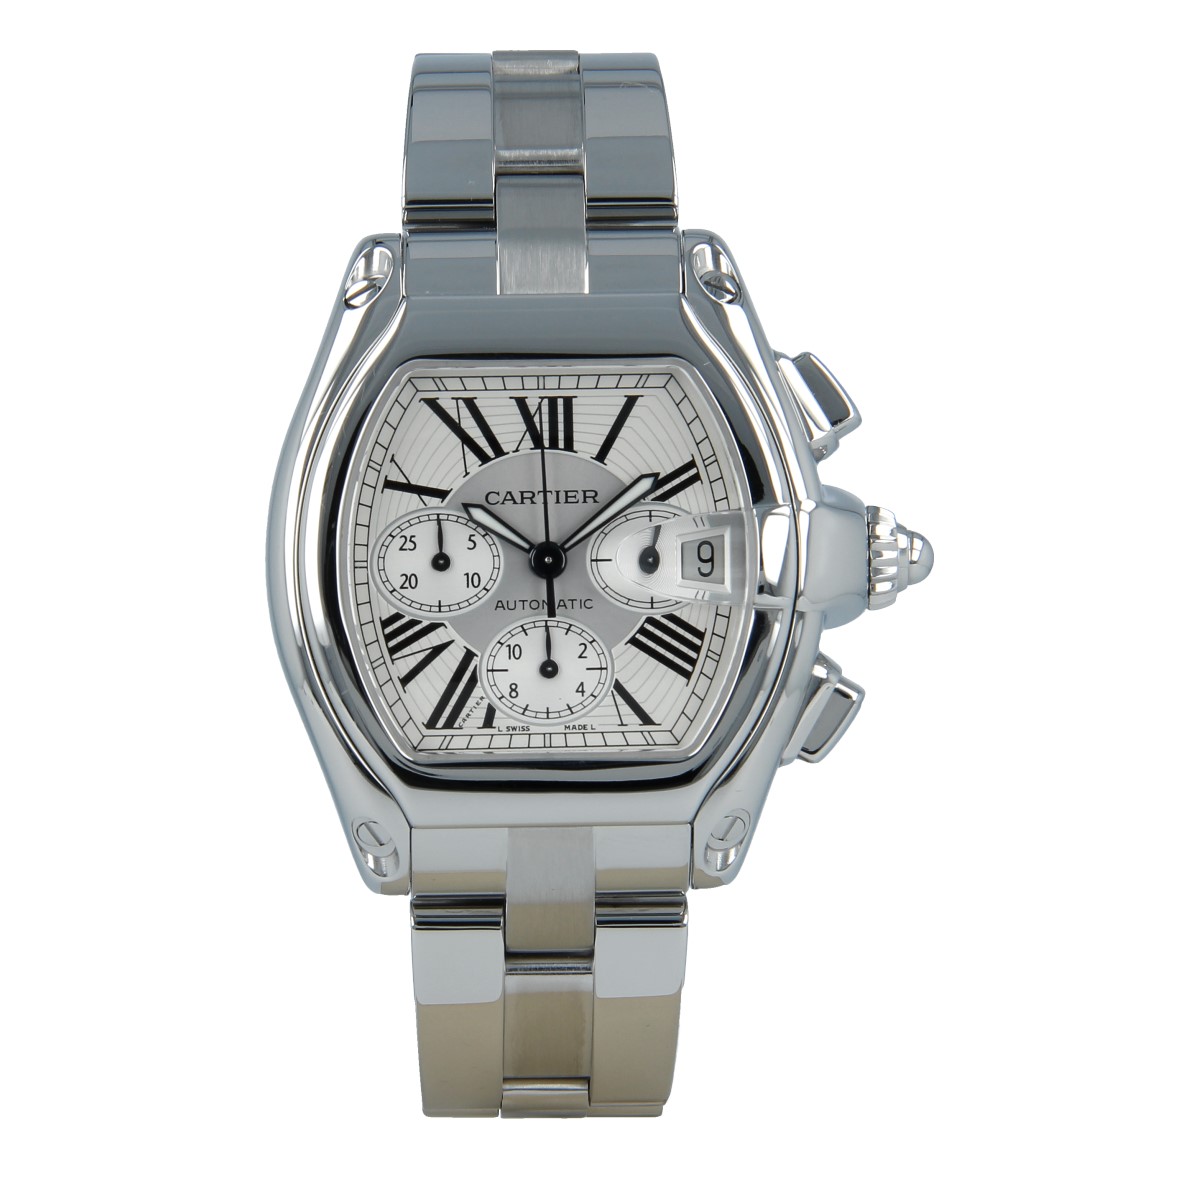 Cartier Roadster 2618 Chronograph | Buy pre-owned Cartier watch